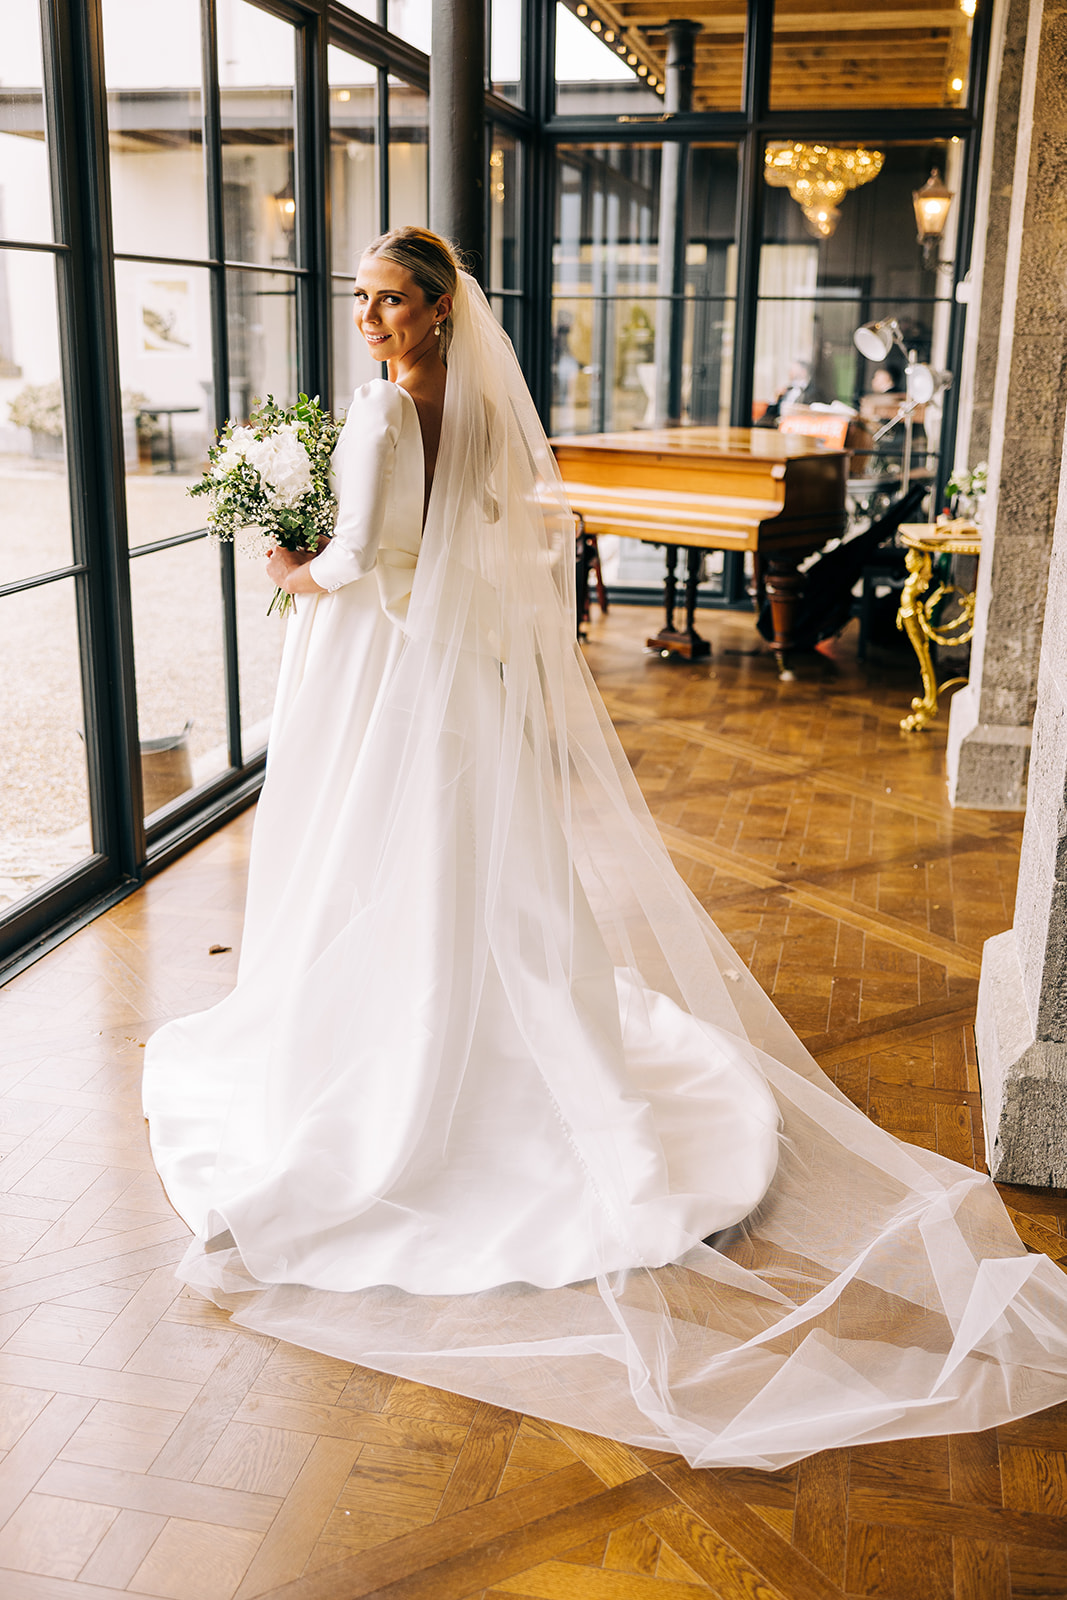 Katie poses for a photo showing off her wedding dress in clonabreany house